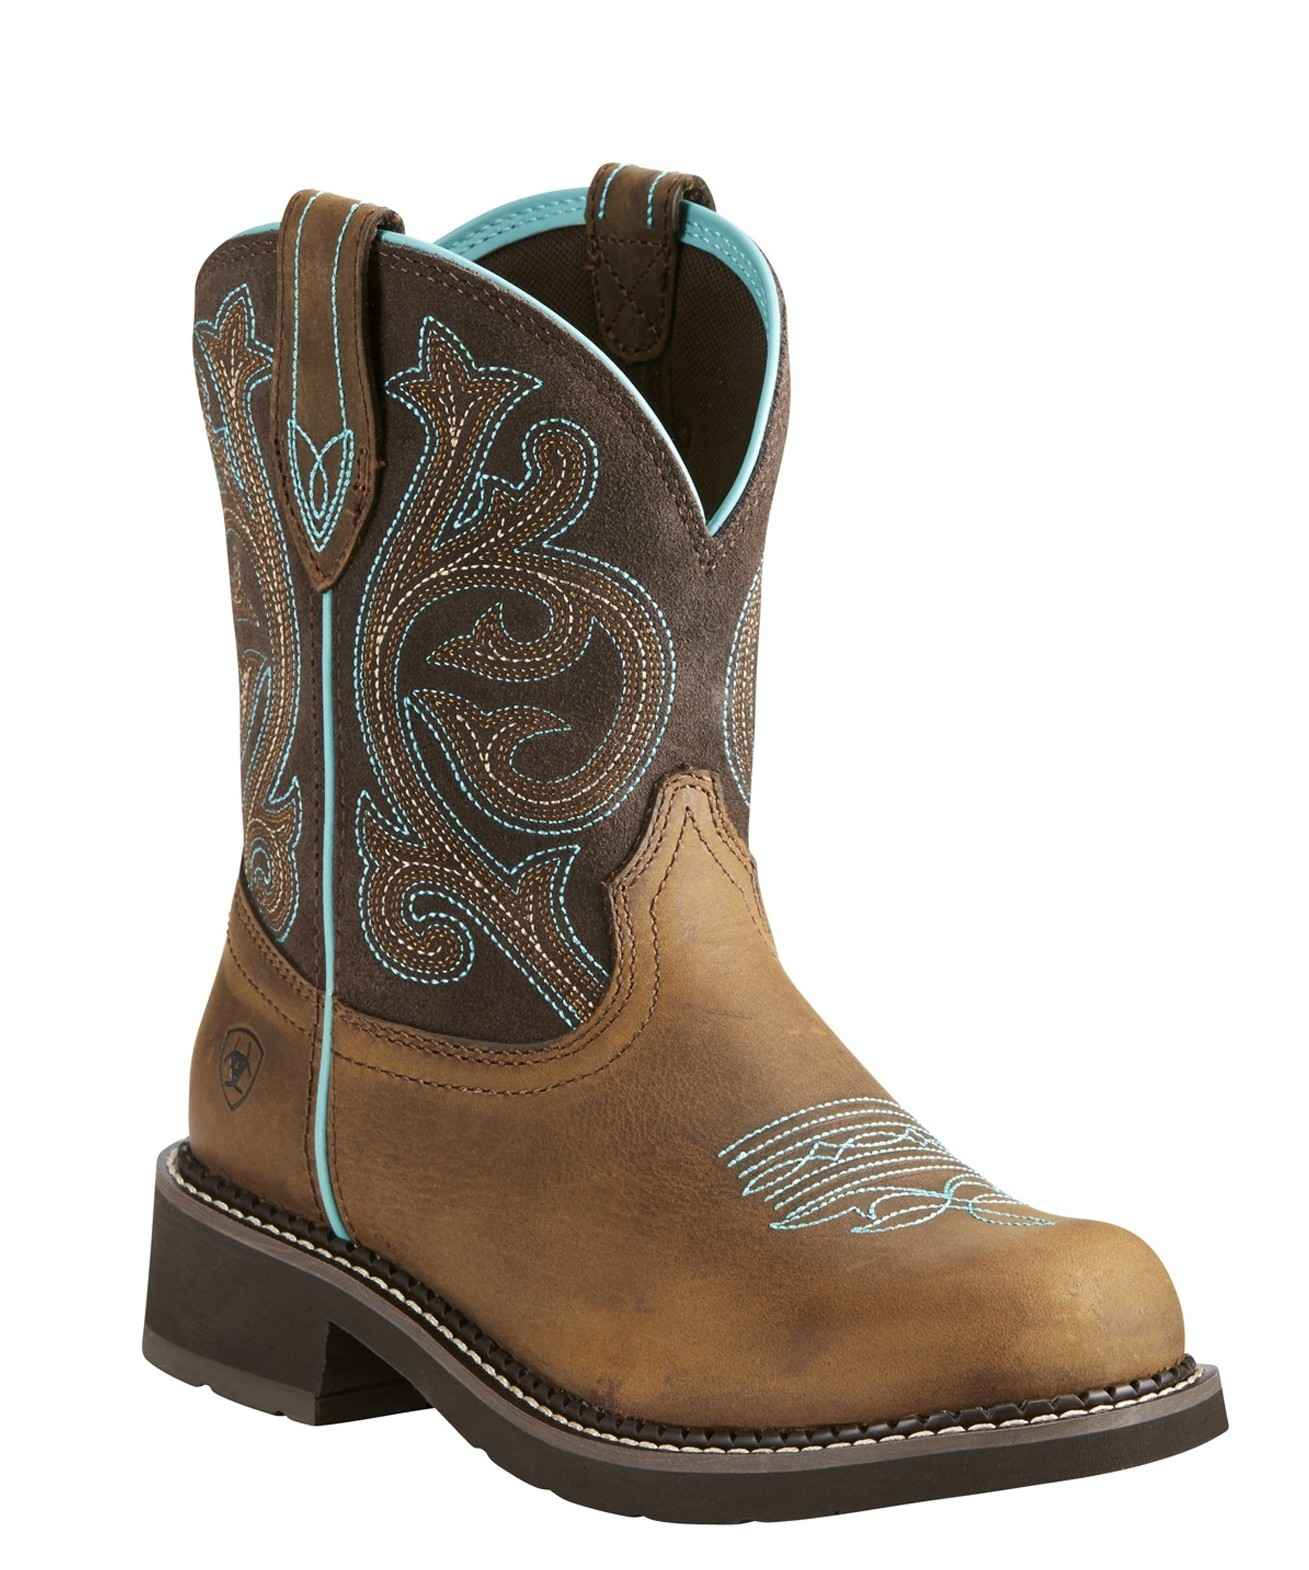 ARIAT INTERNATIONAL, INC. Boots Ariat Women's Fatbaby Heritage Brown & Turquoise Cowgirl Boots 10021462